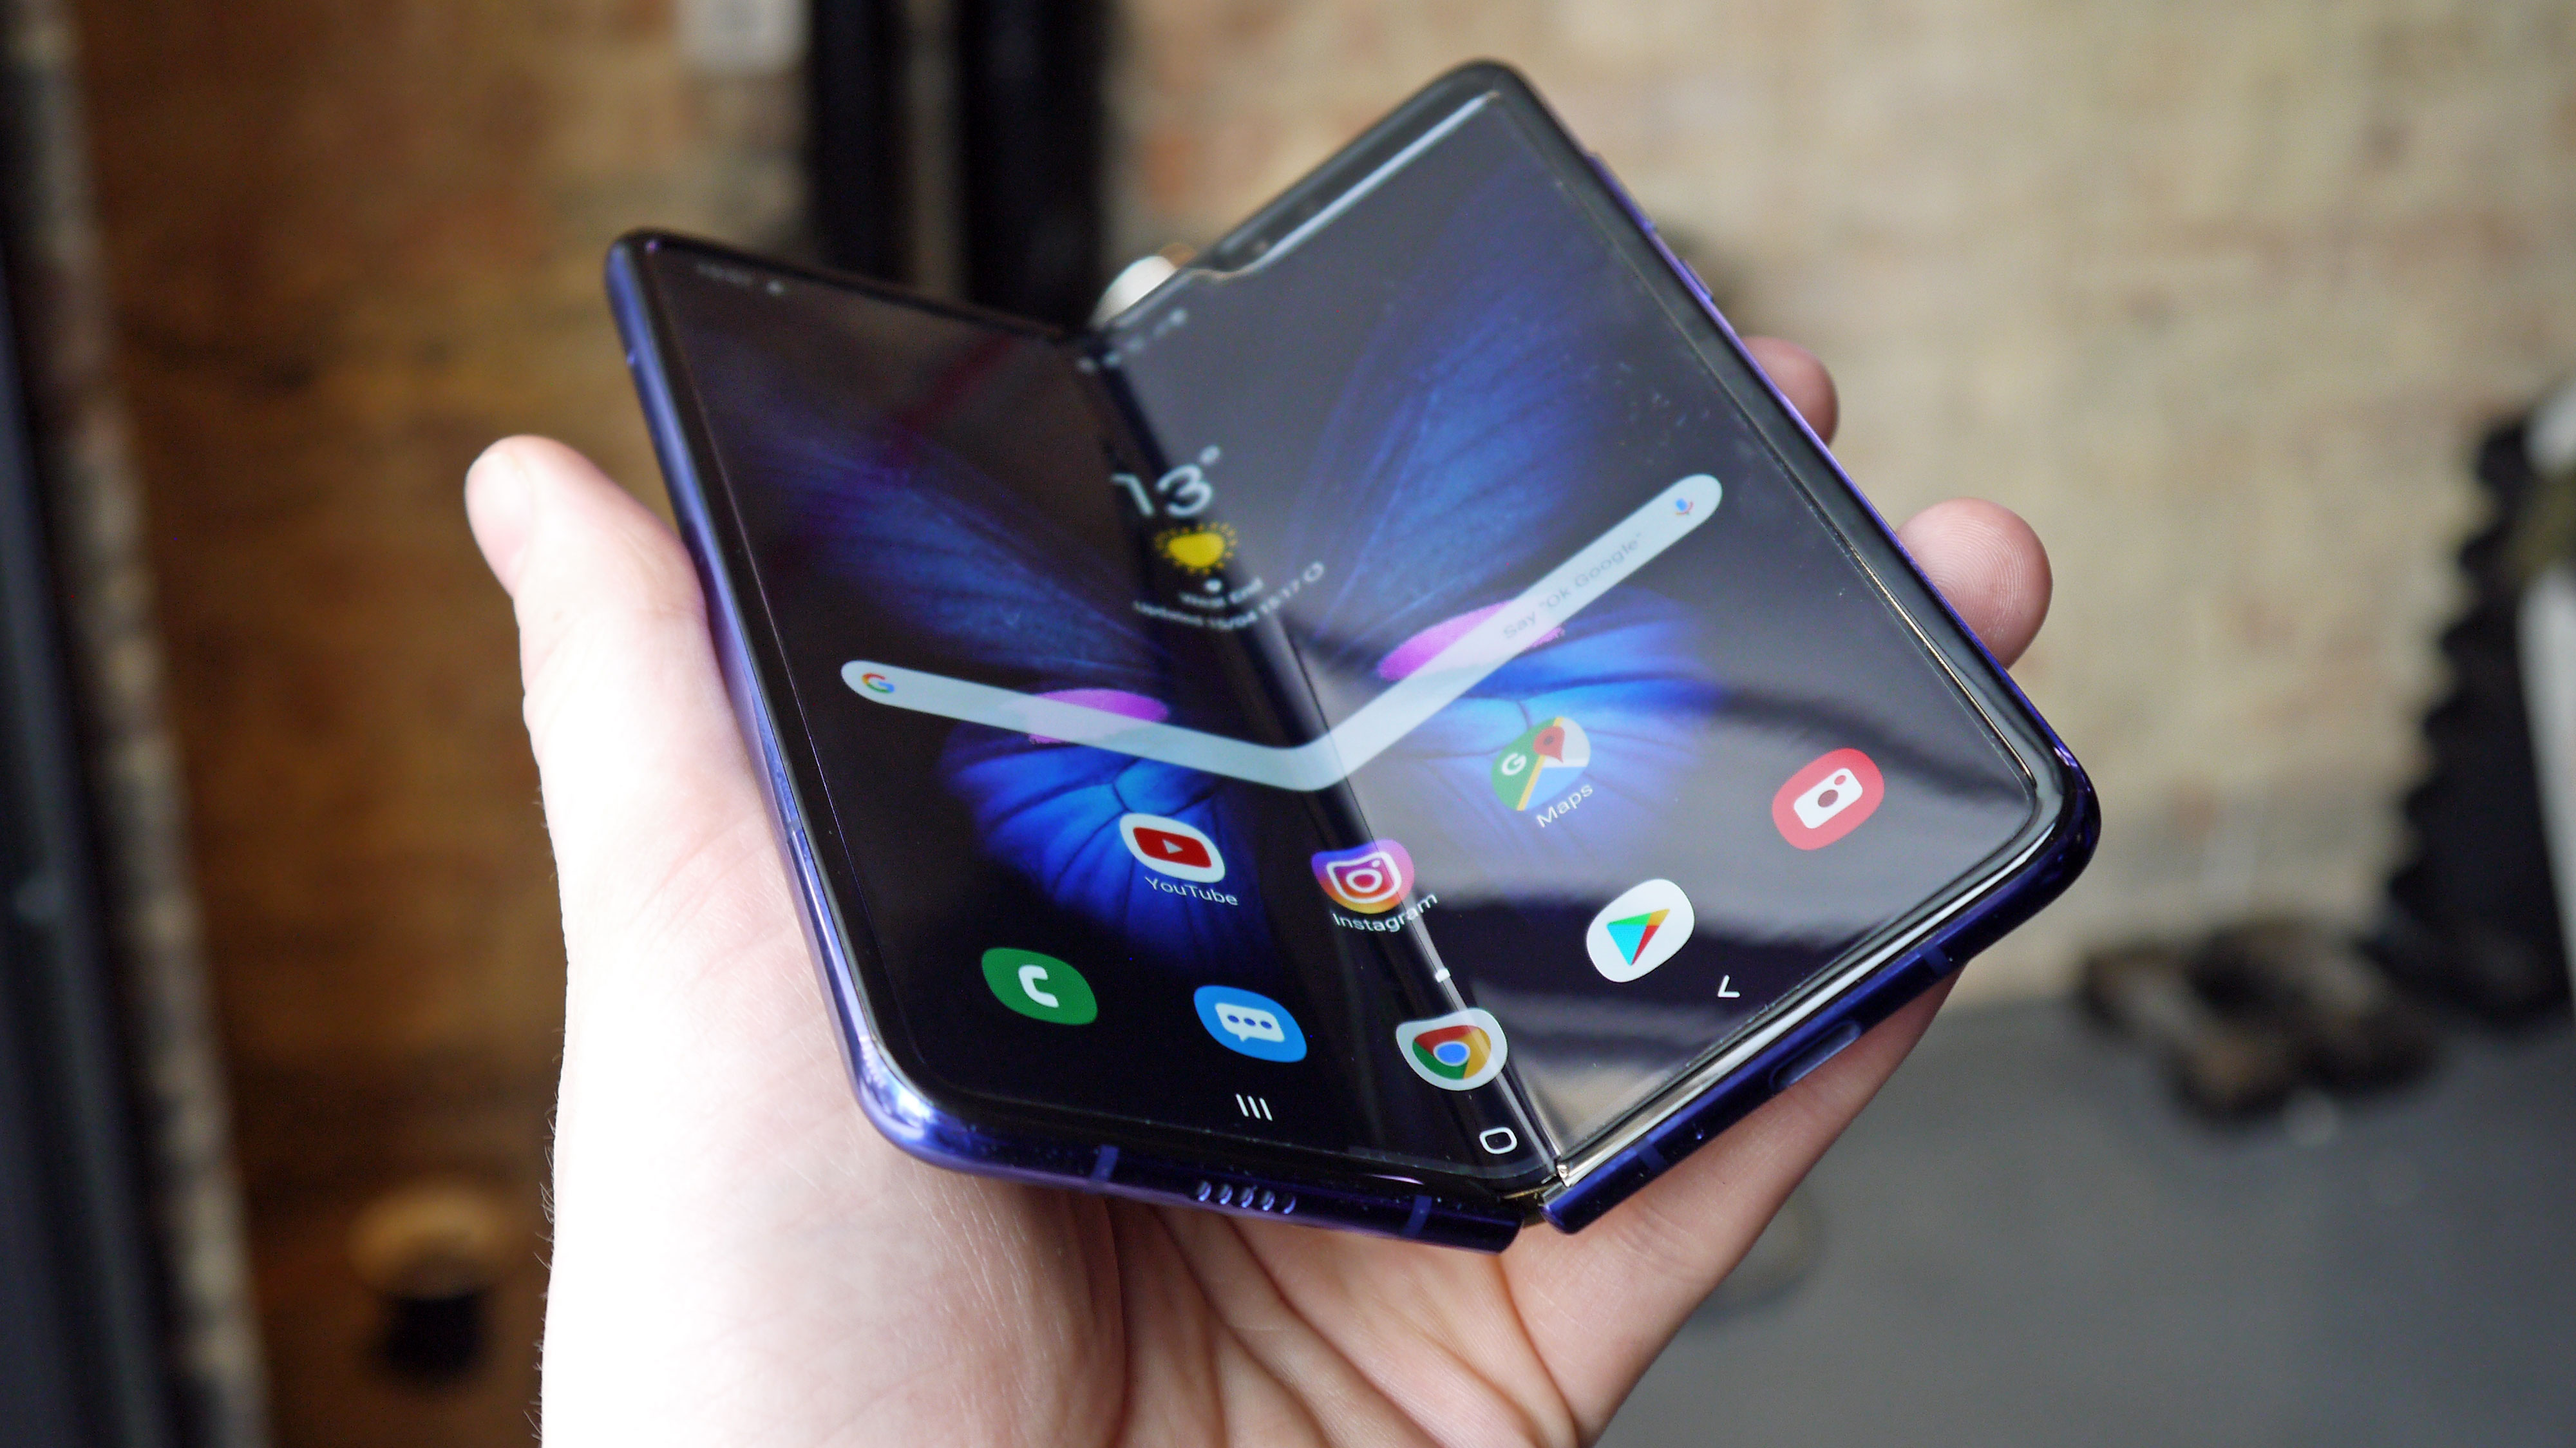 The new Samsung Galaxy Fold release date is to be confirmed later in